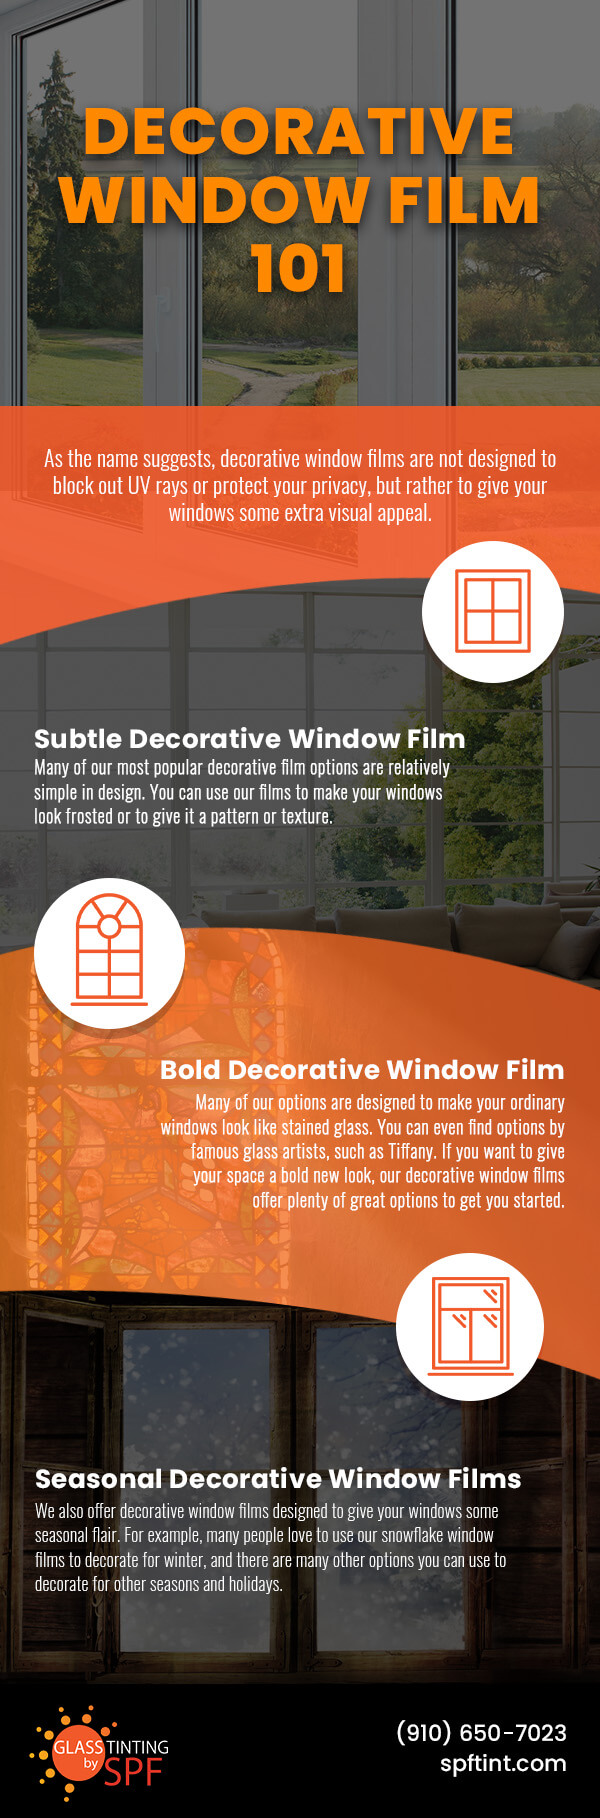 Learn more about the different types of decorative window film